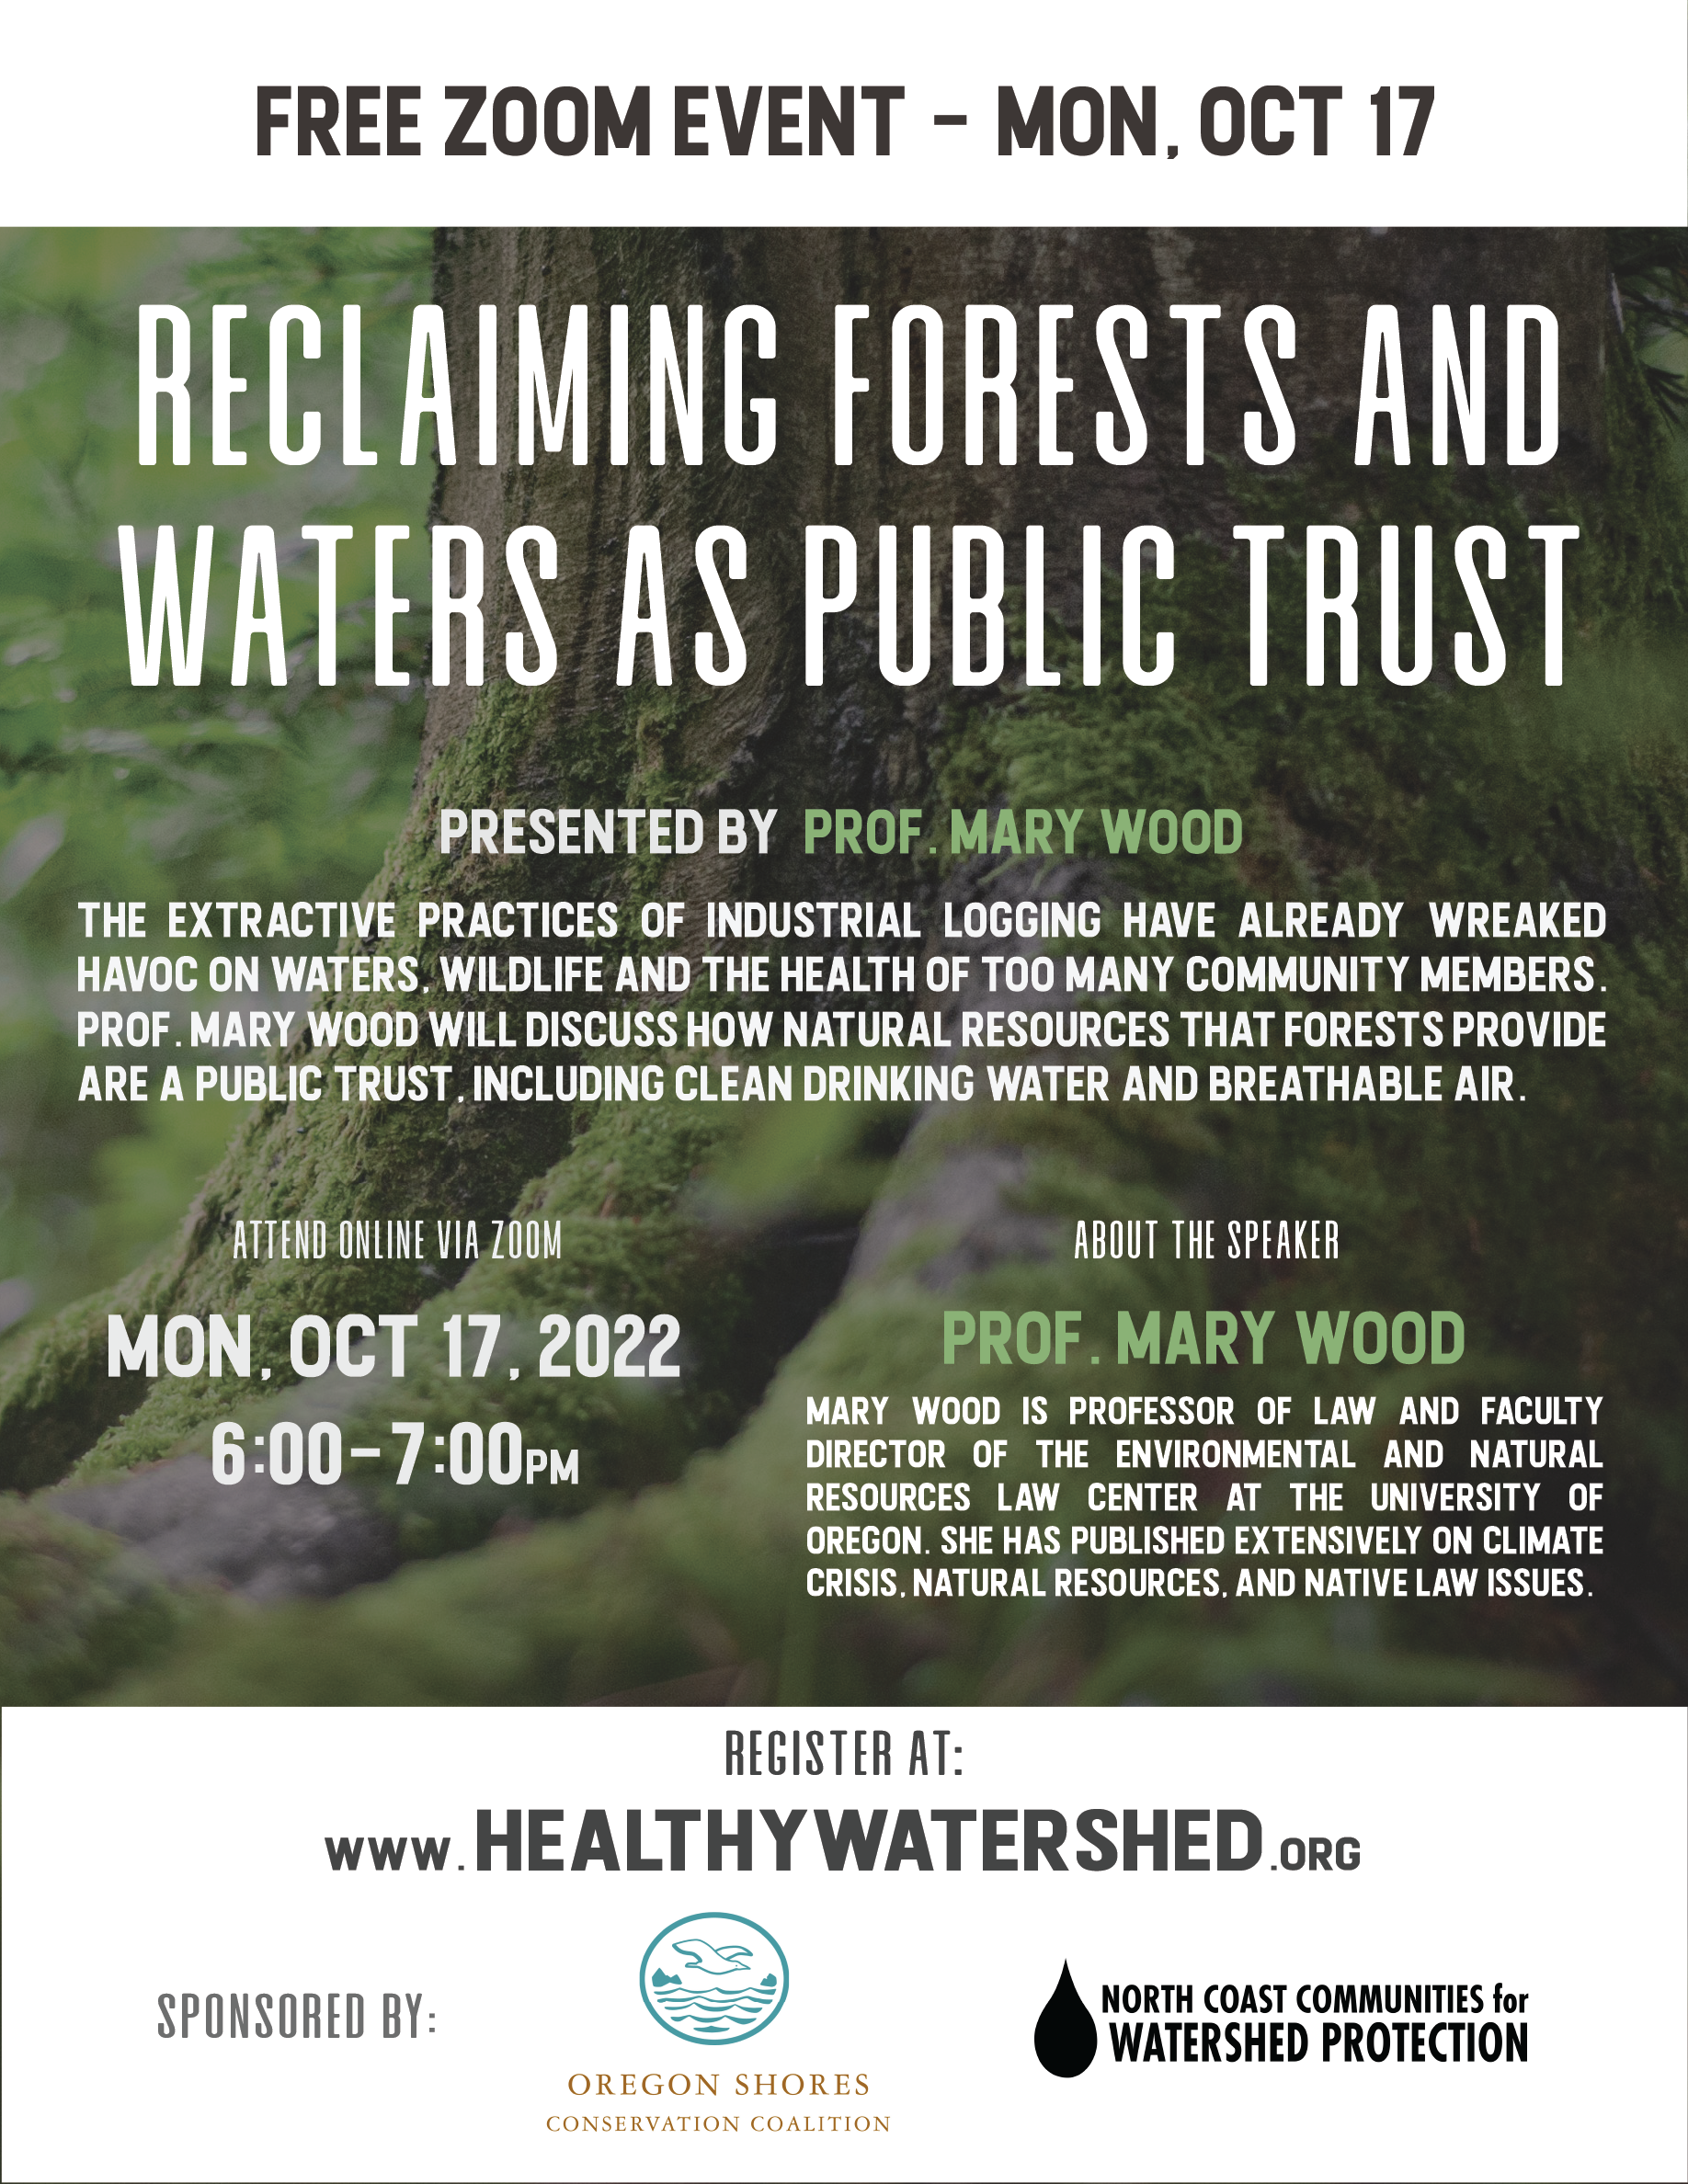 Reclaiming Forests and Waters as Public Trust